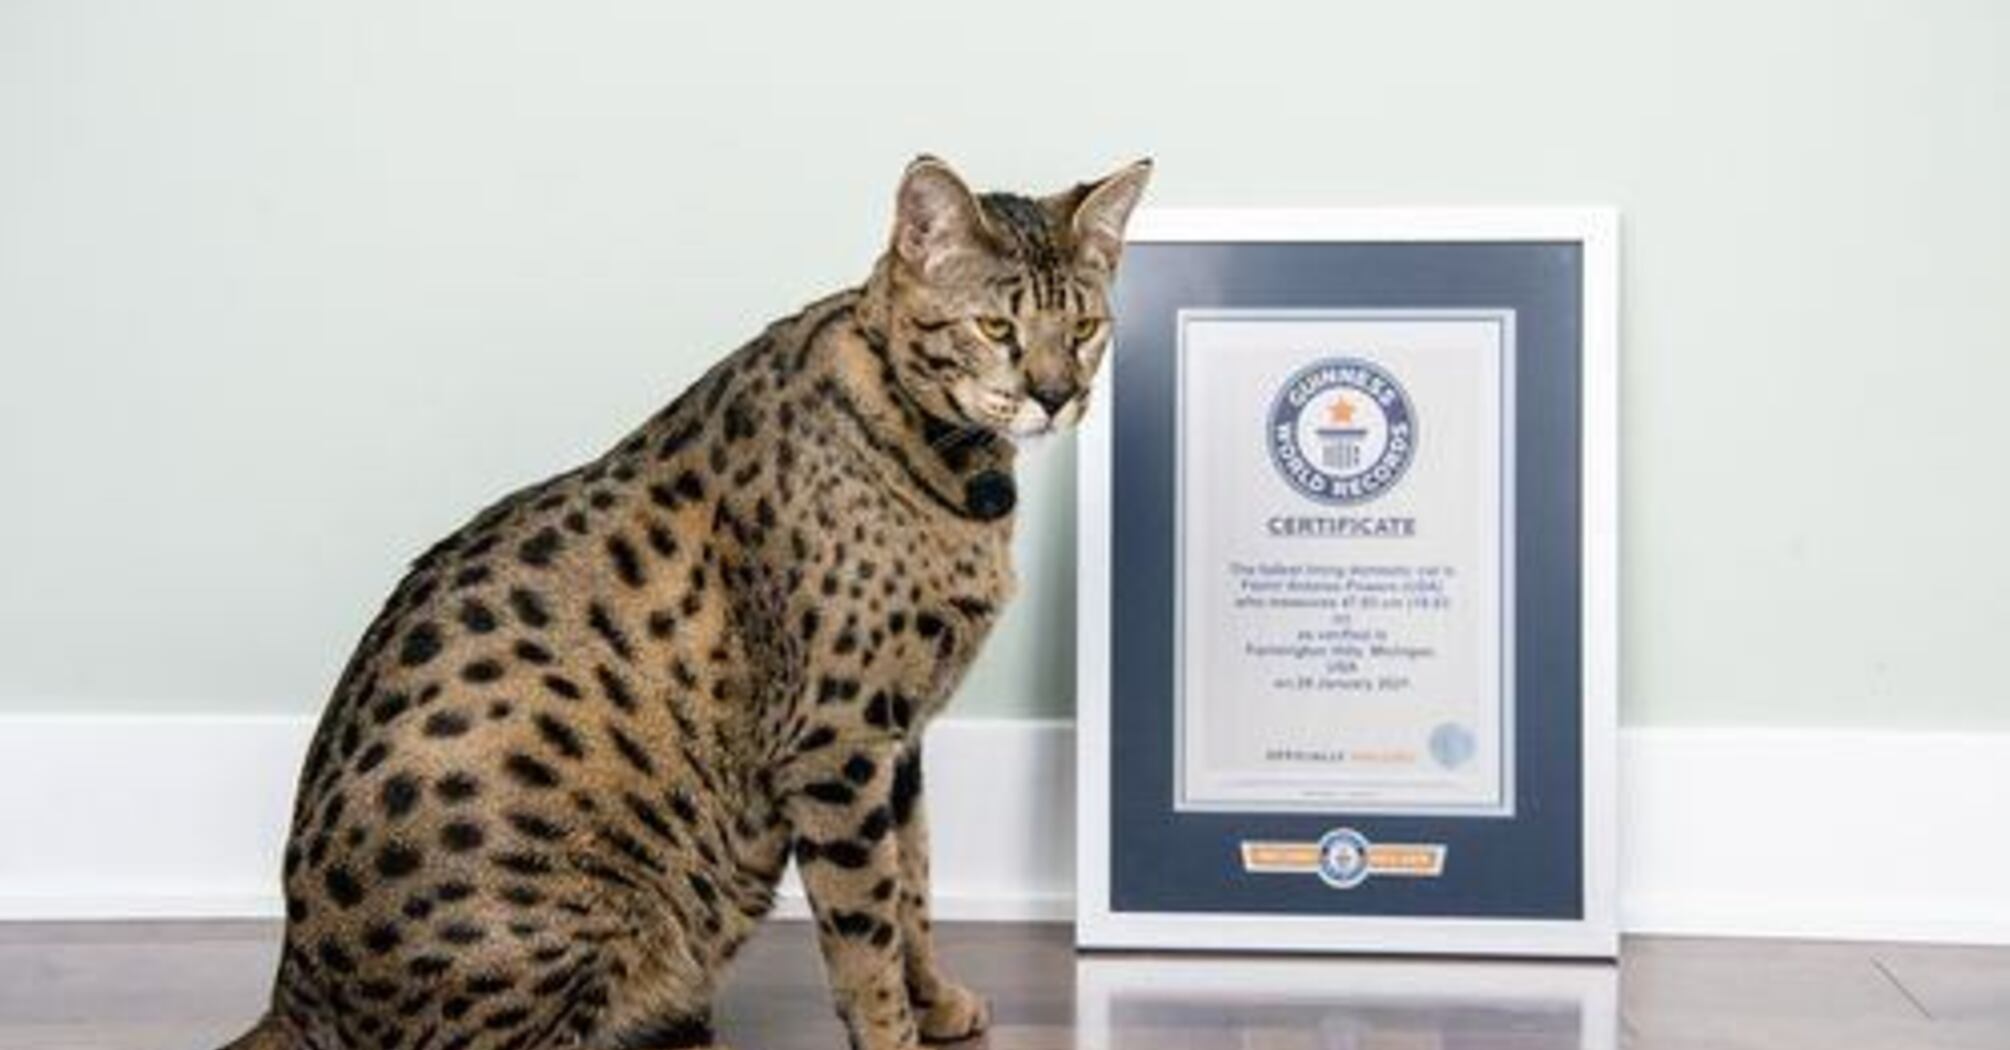 Unusual cats from the Guinness Book of World Records